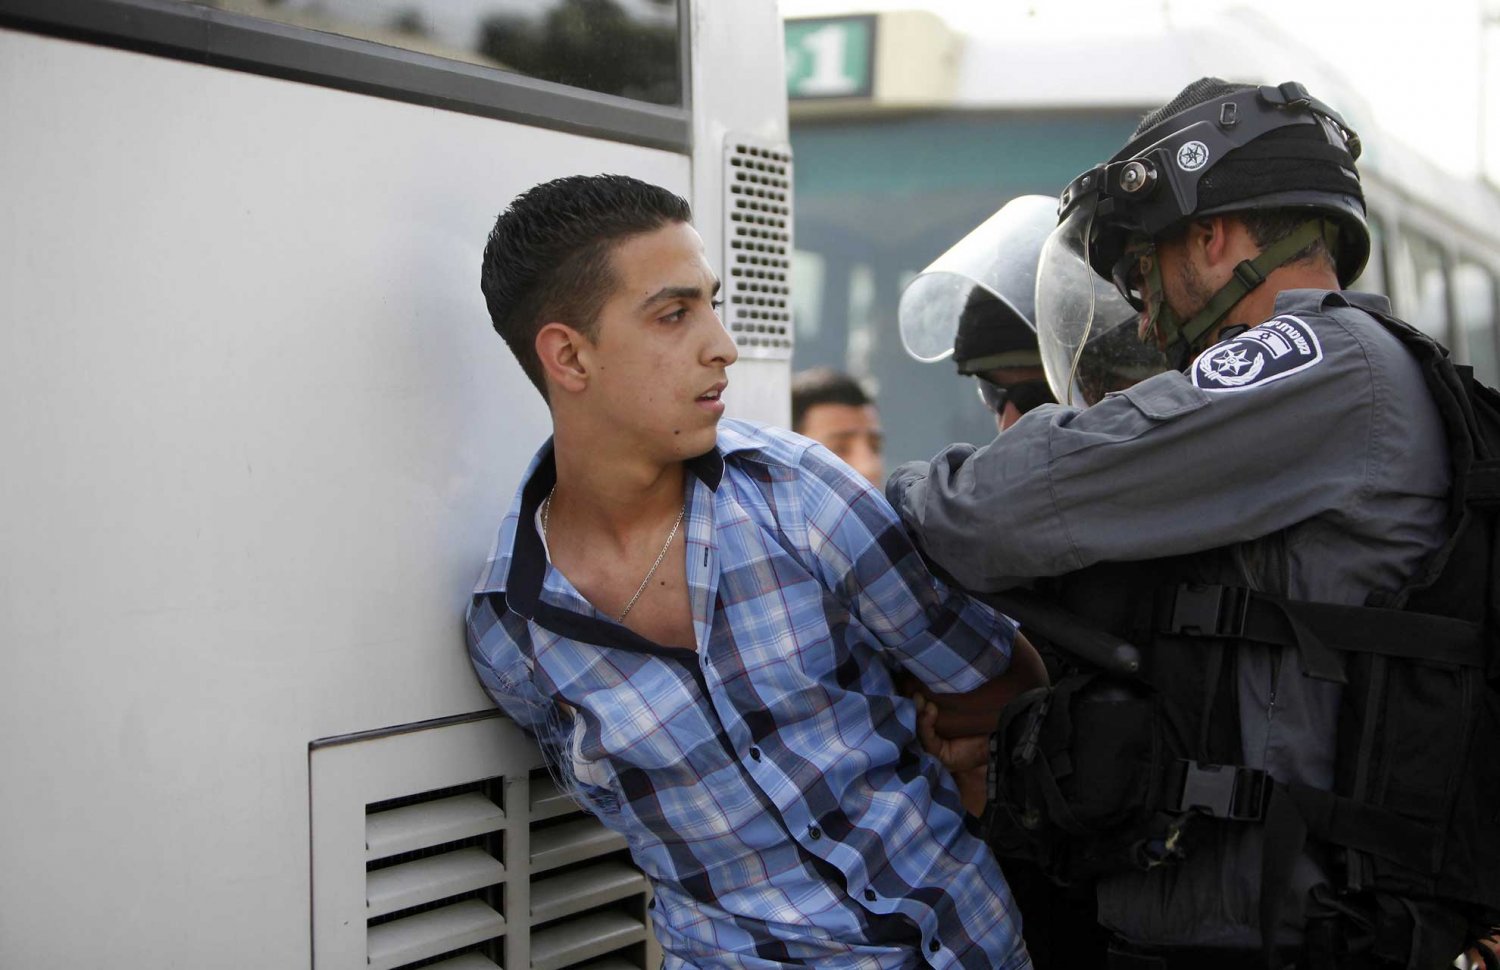 Palestinian youths and Israeli police clashed on Nablus Road in East Jerusalem,  May 8, 2013.